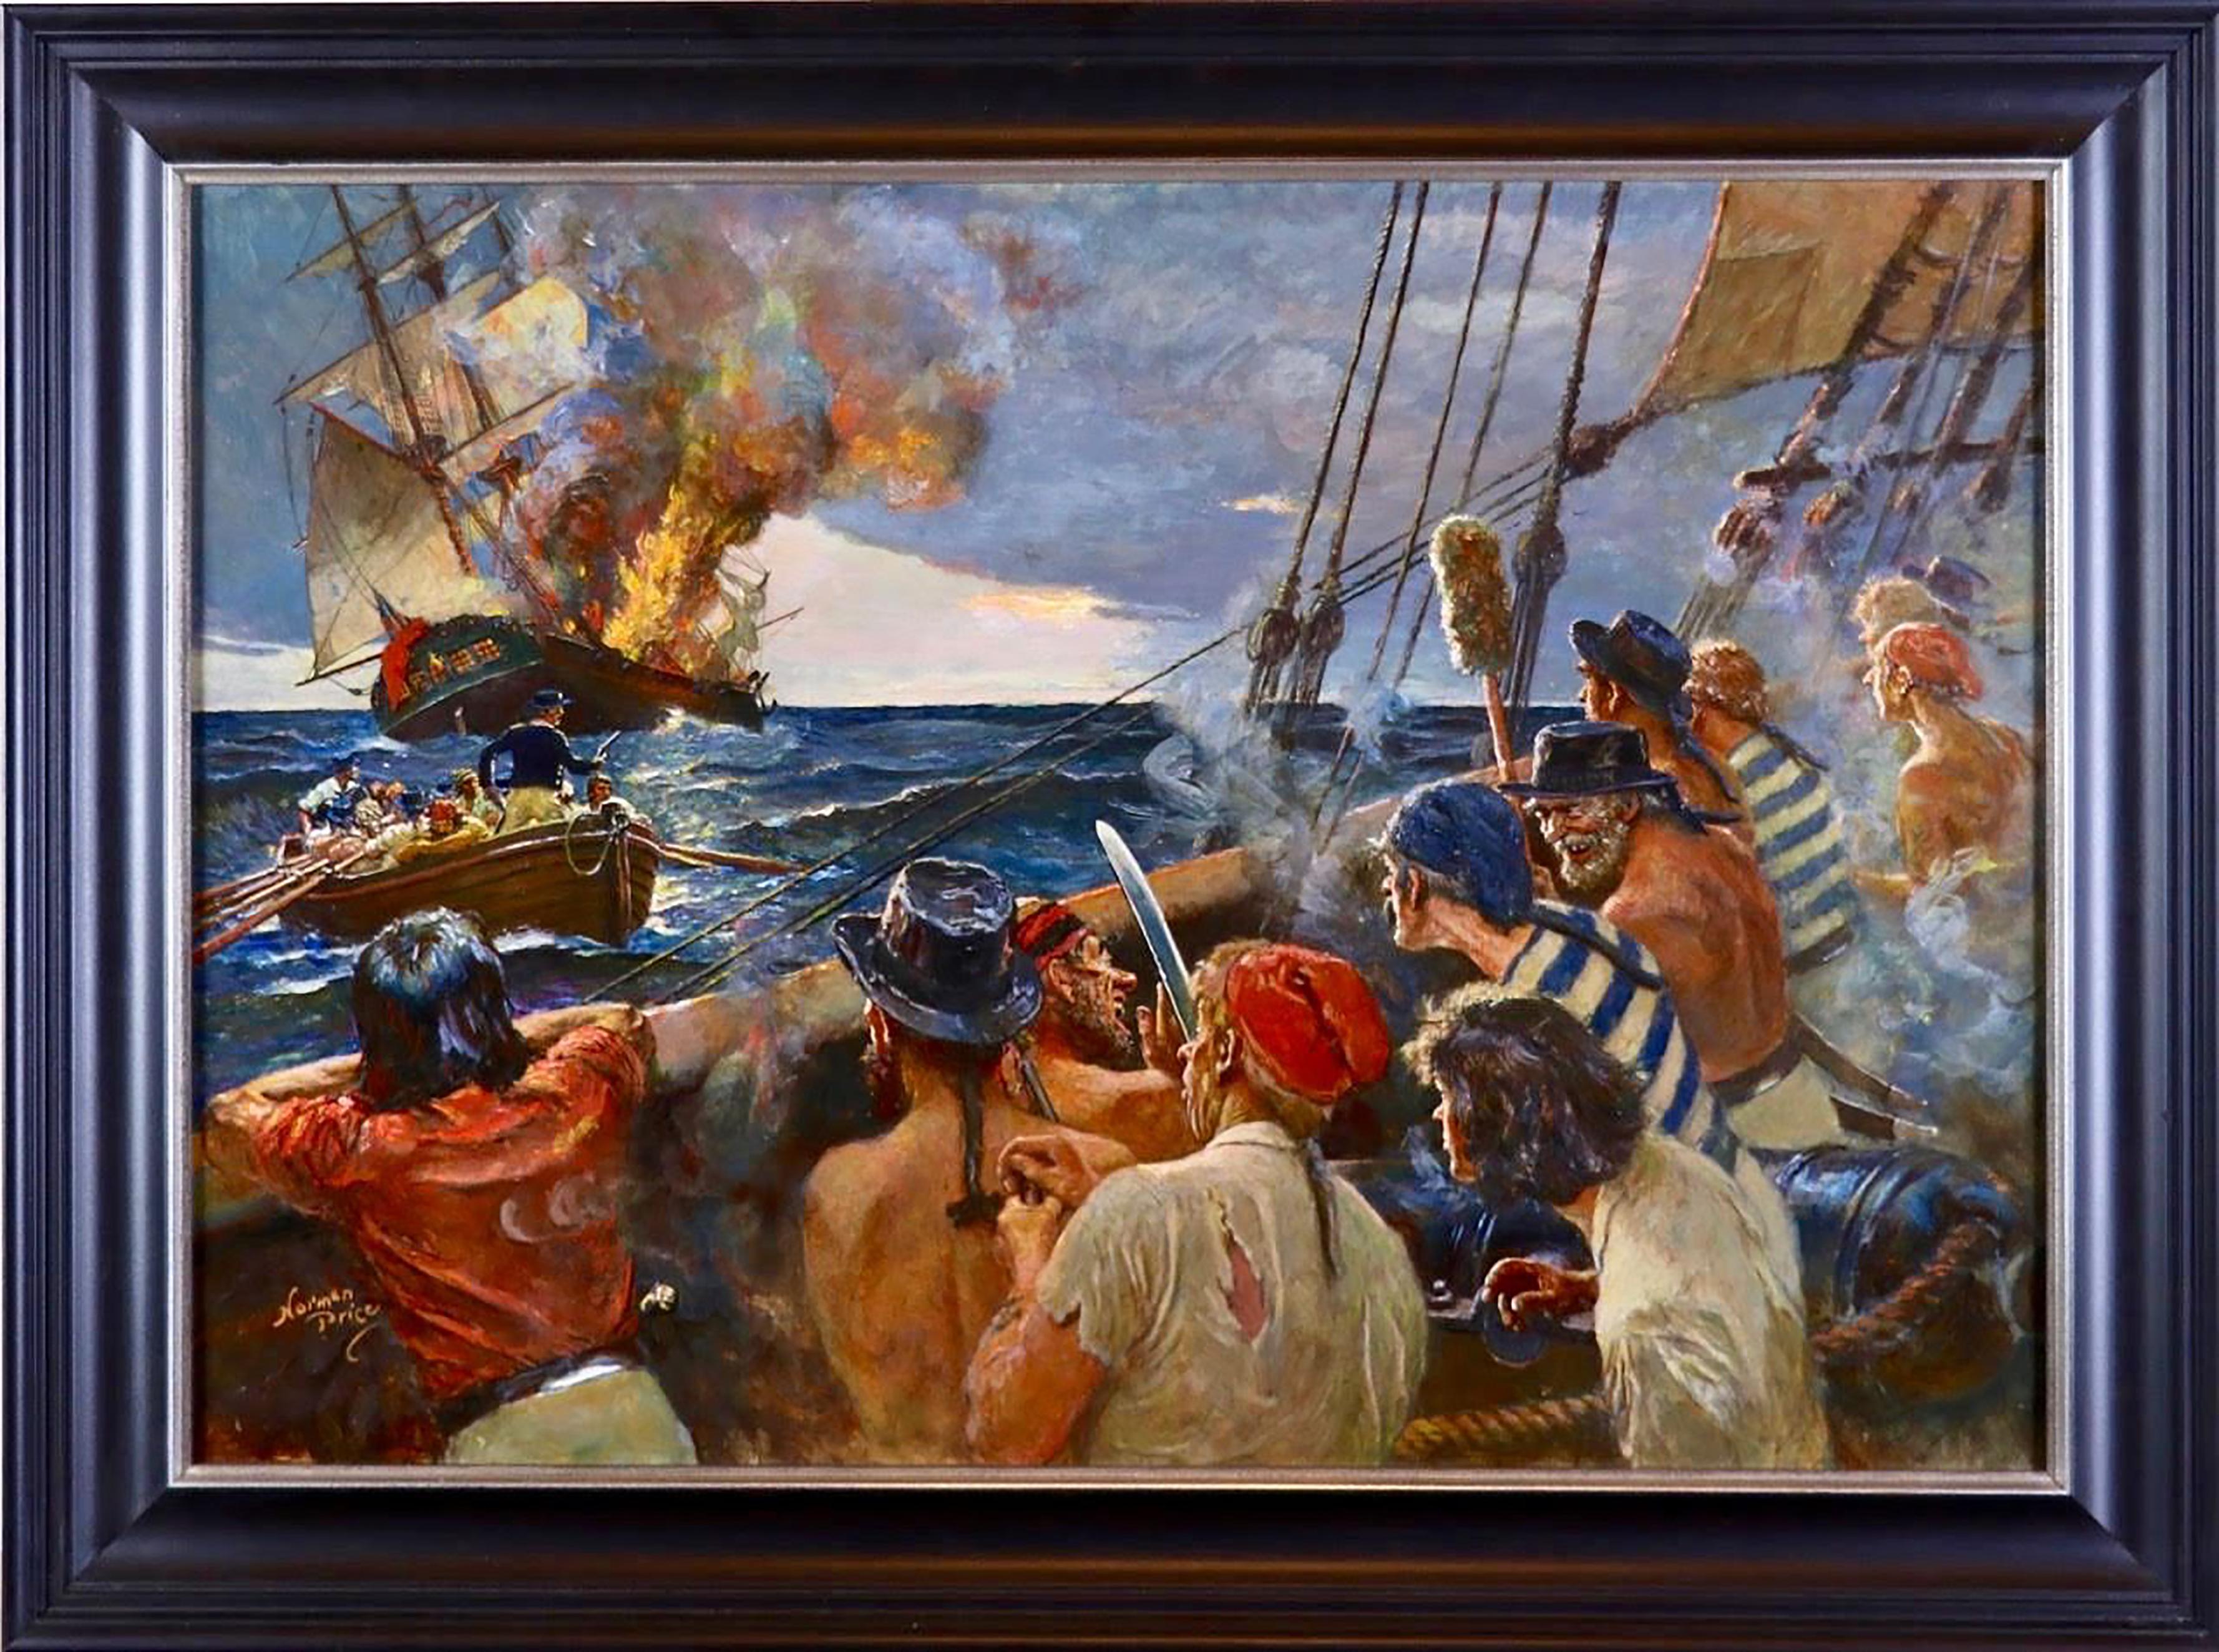 Pirates Destroying Ship - Painting by Norman Price